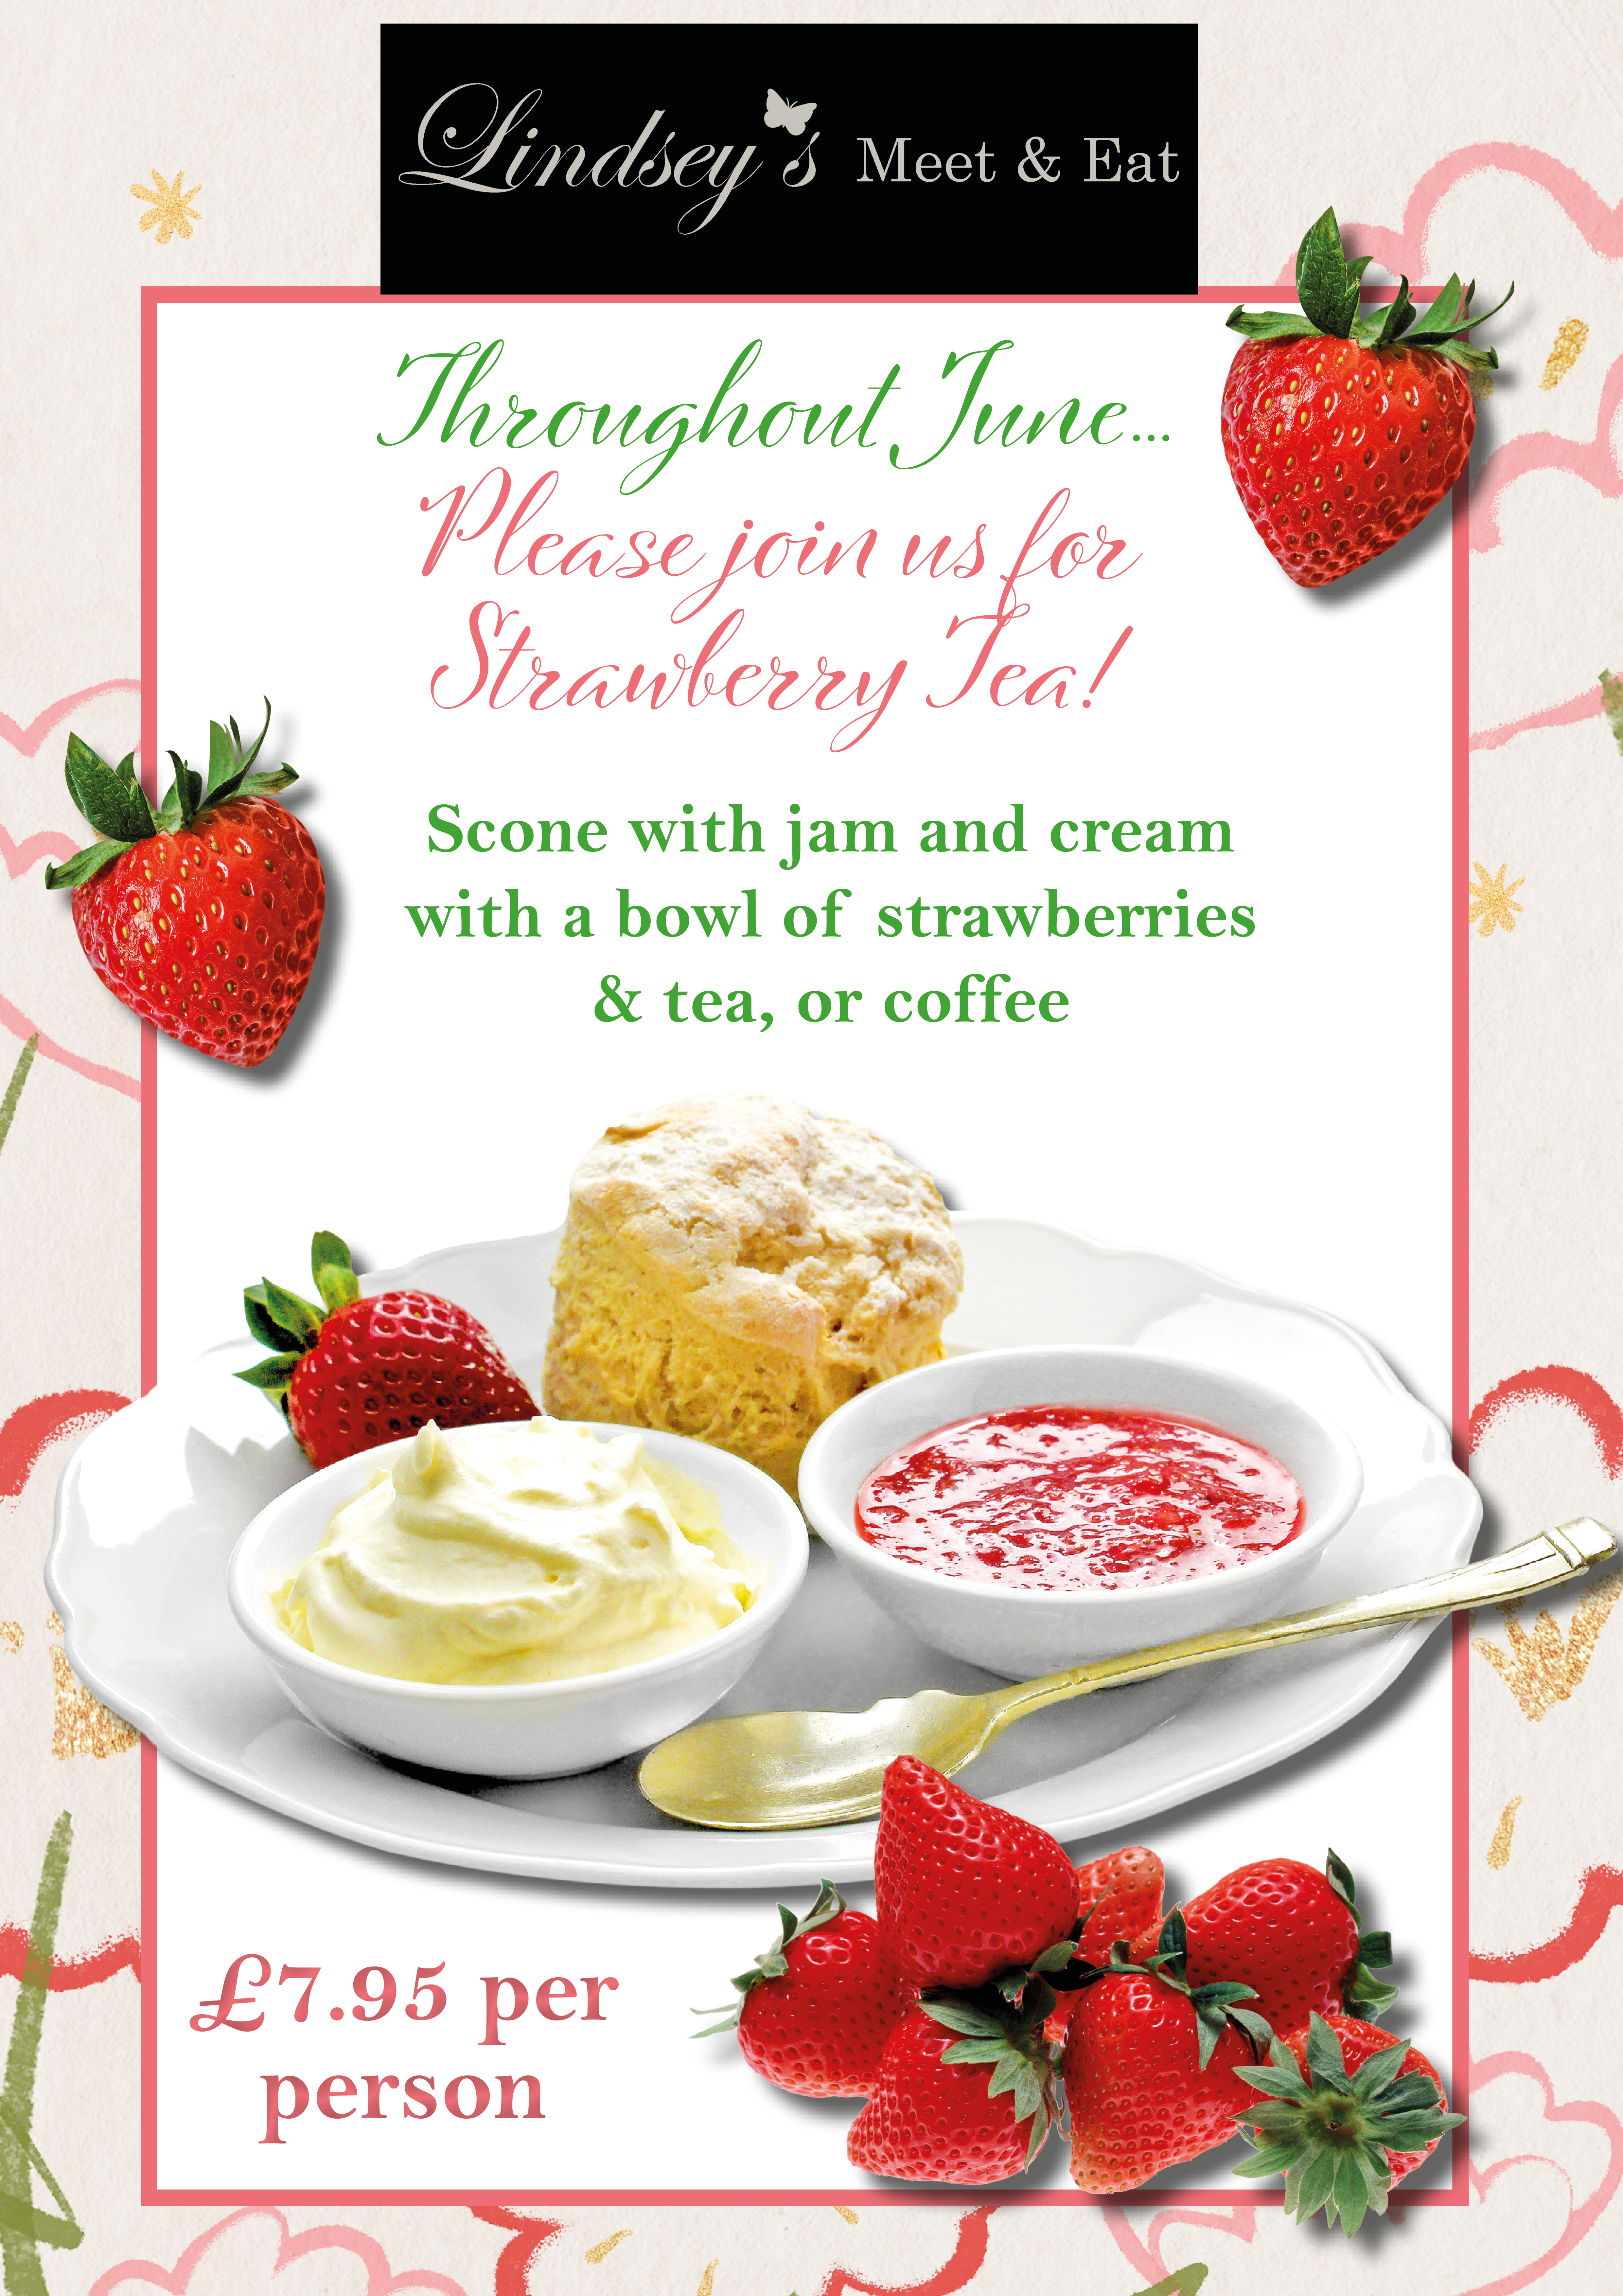 poster offering strawberry tea